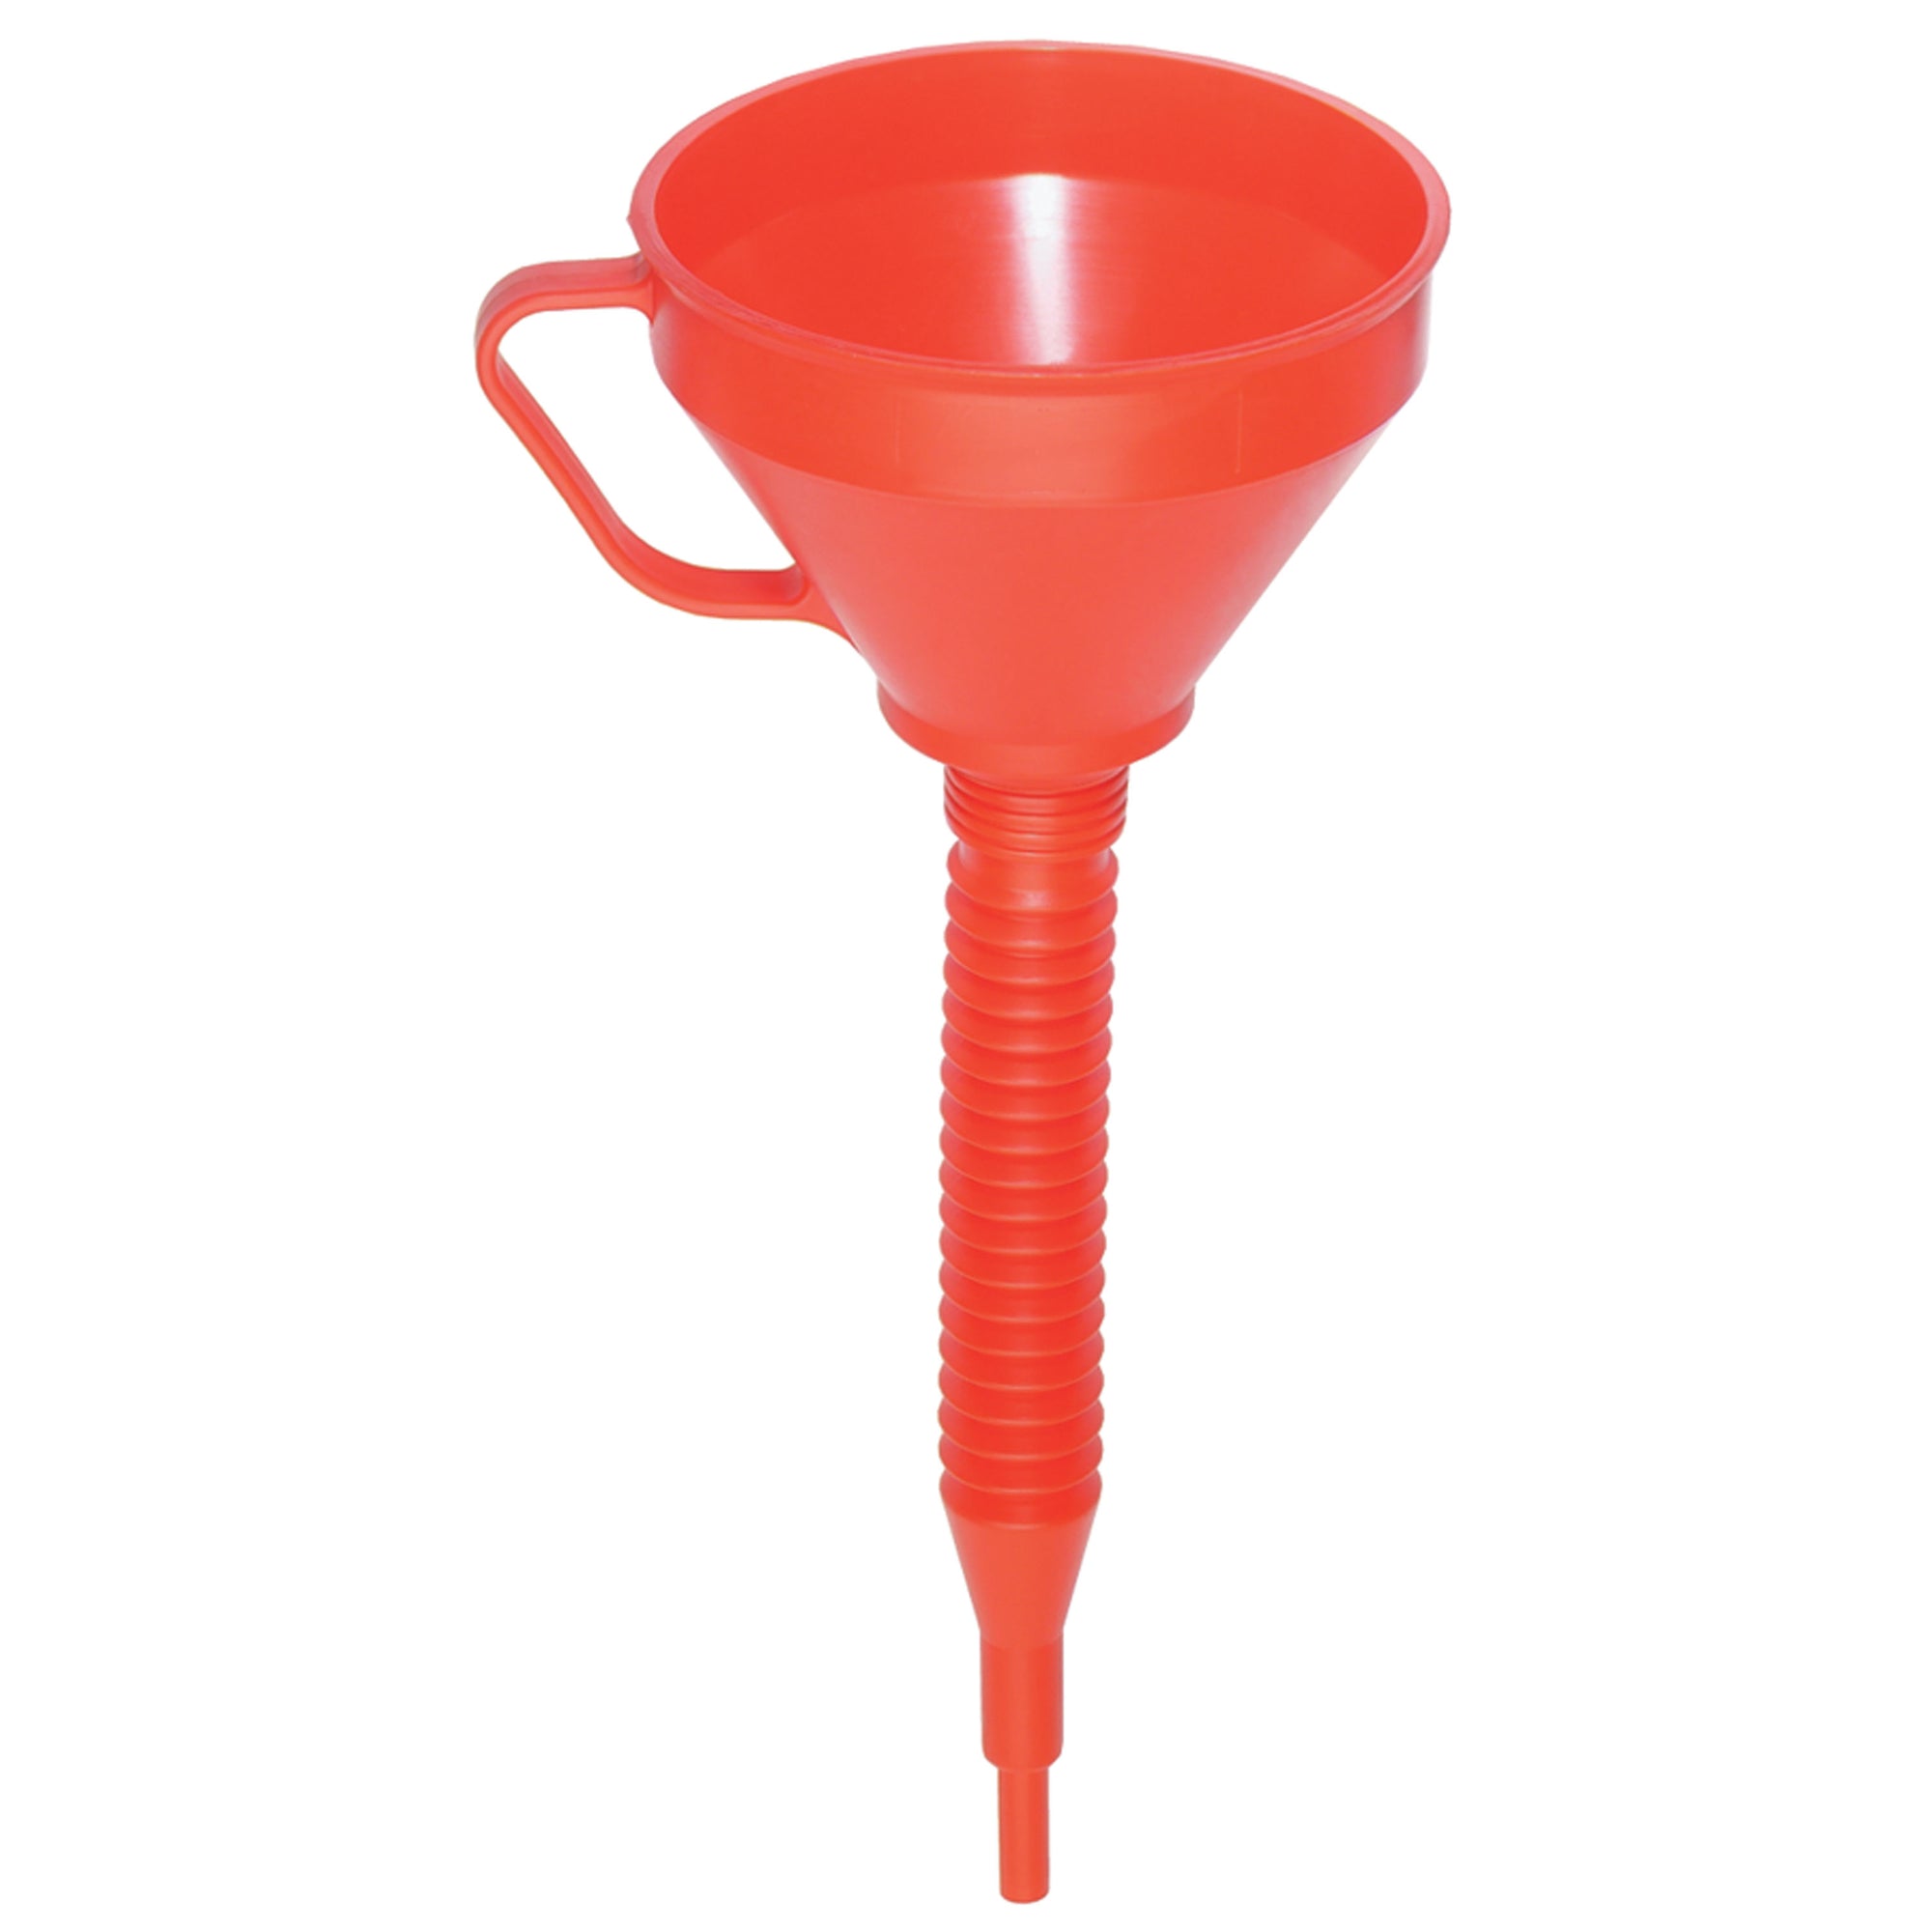 Attwood 14580-1 Long Flexible Funnel with Handle